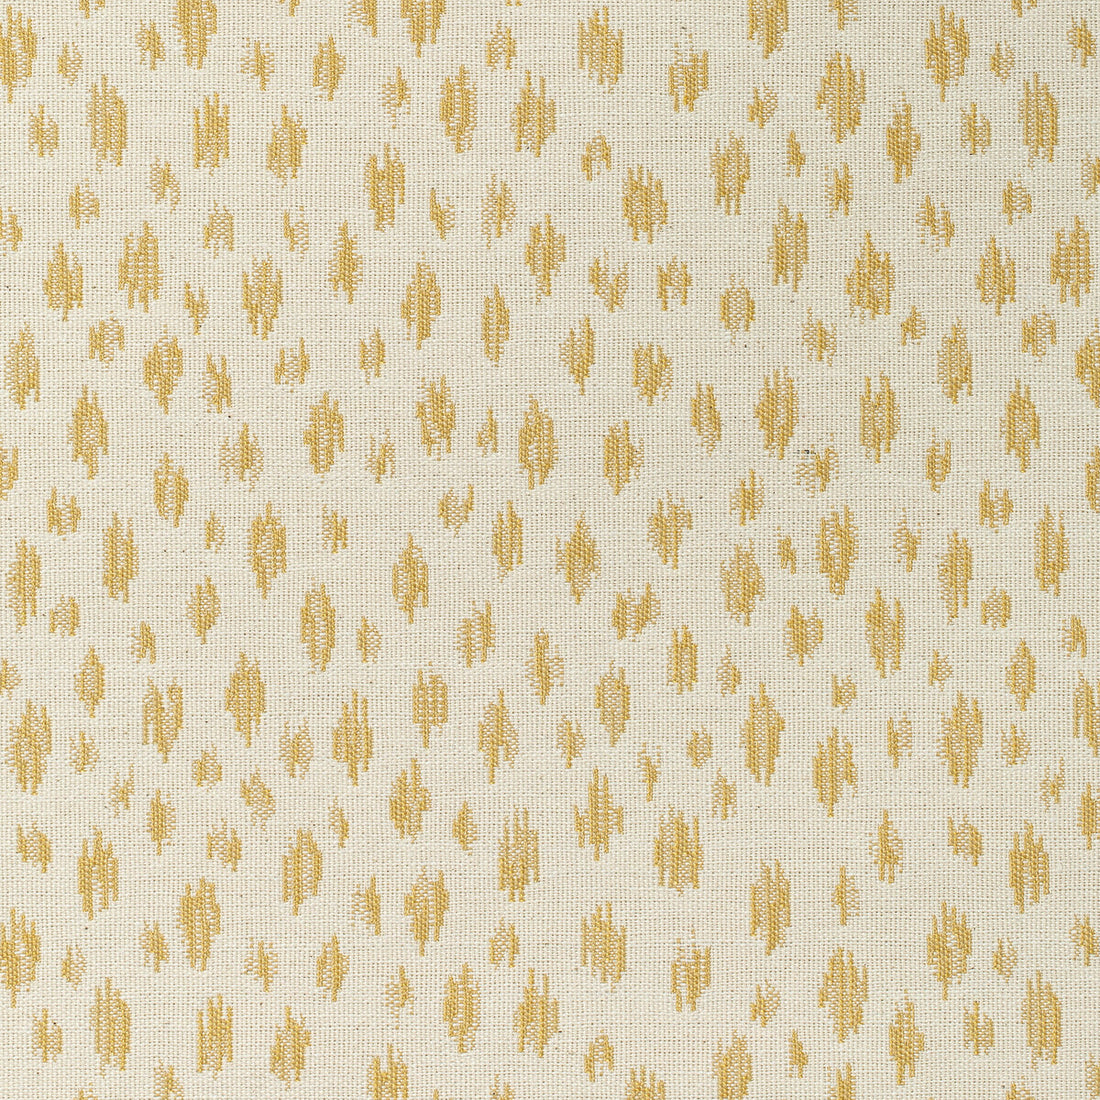 Honfleur Woven fabric in canary color - pattern 8020112.4.0 - by Brunschwig &amp; Fils in the Granville Weaves collection